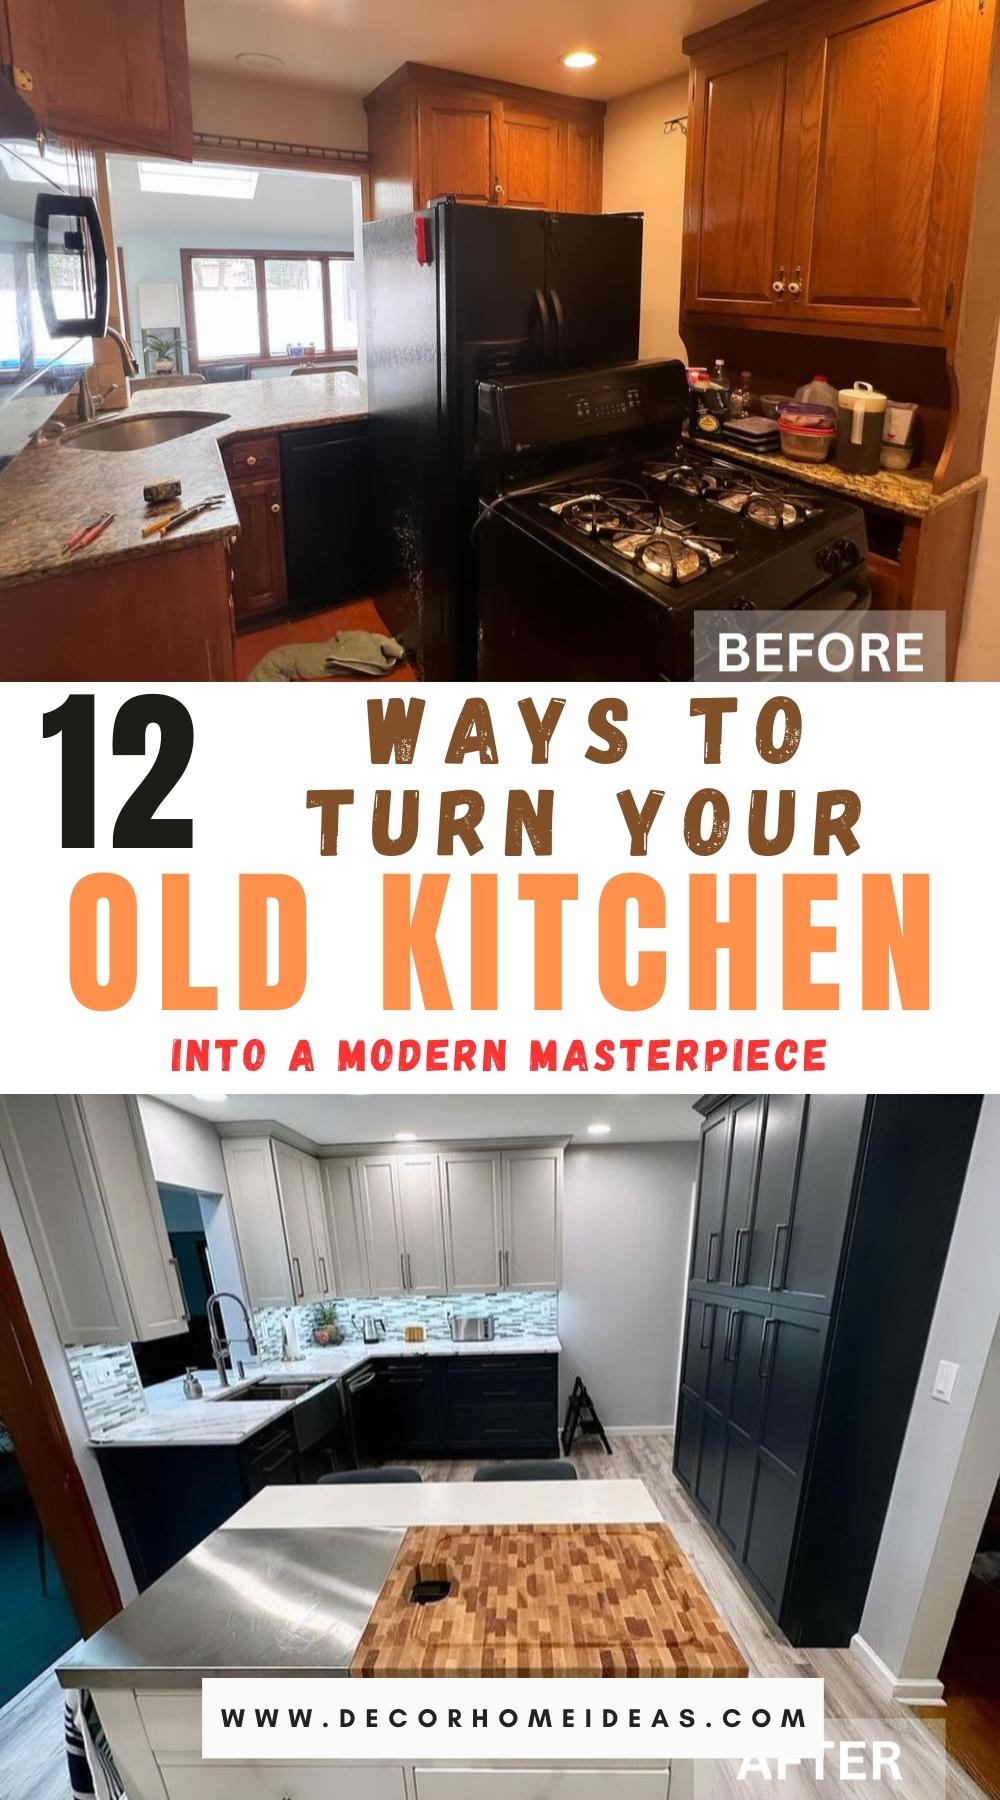 Kitchen Remodel Old To Modern